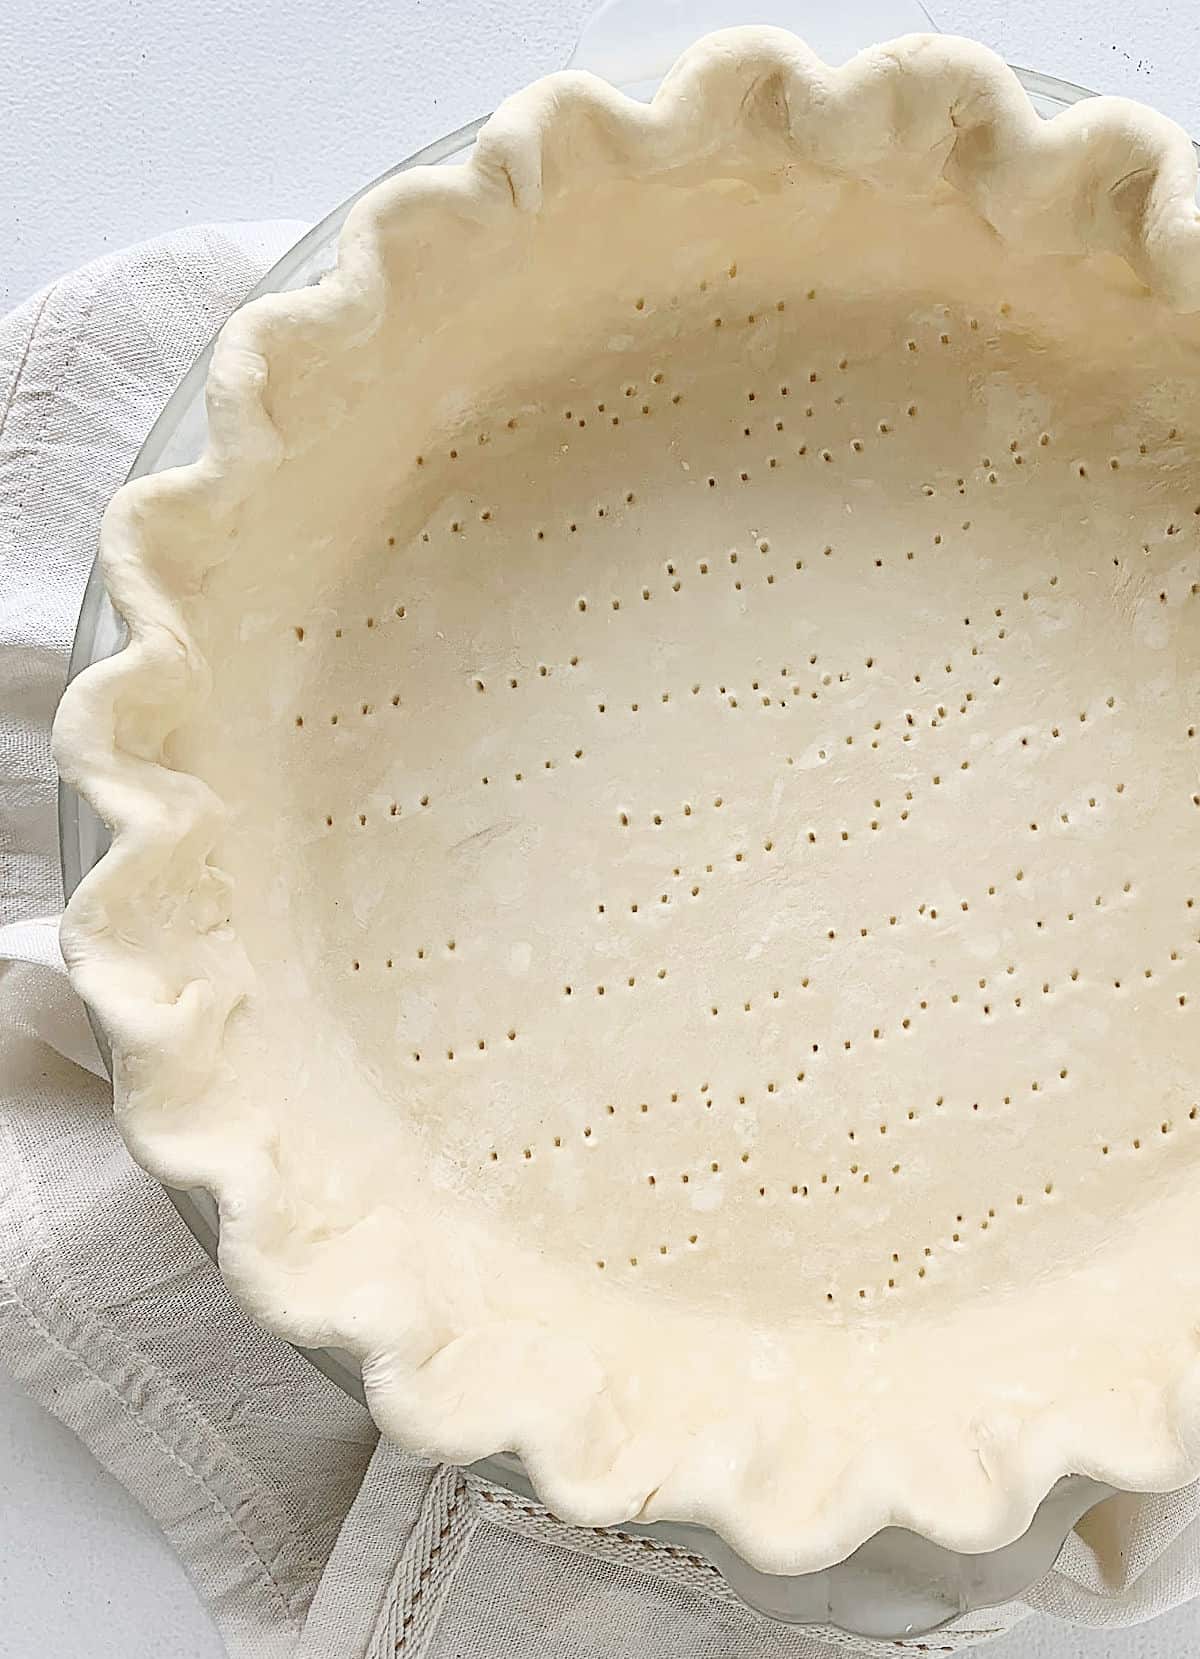 Partial view of unbaked pie crust with crimped edges on a white linen and table.